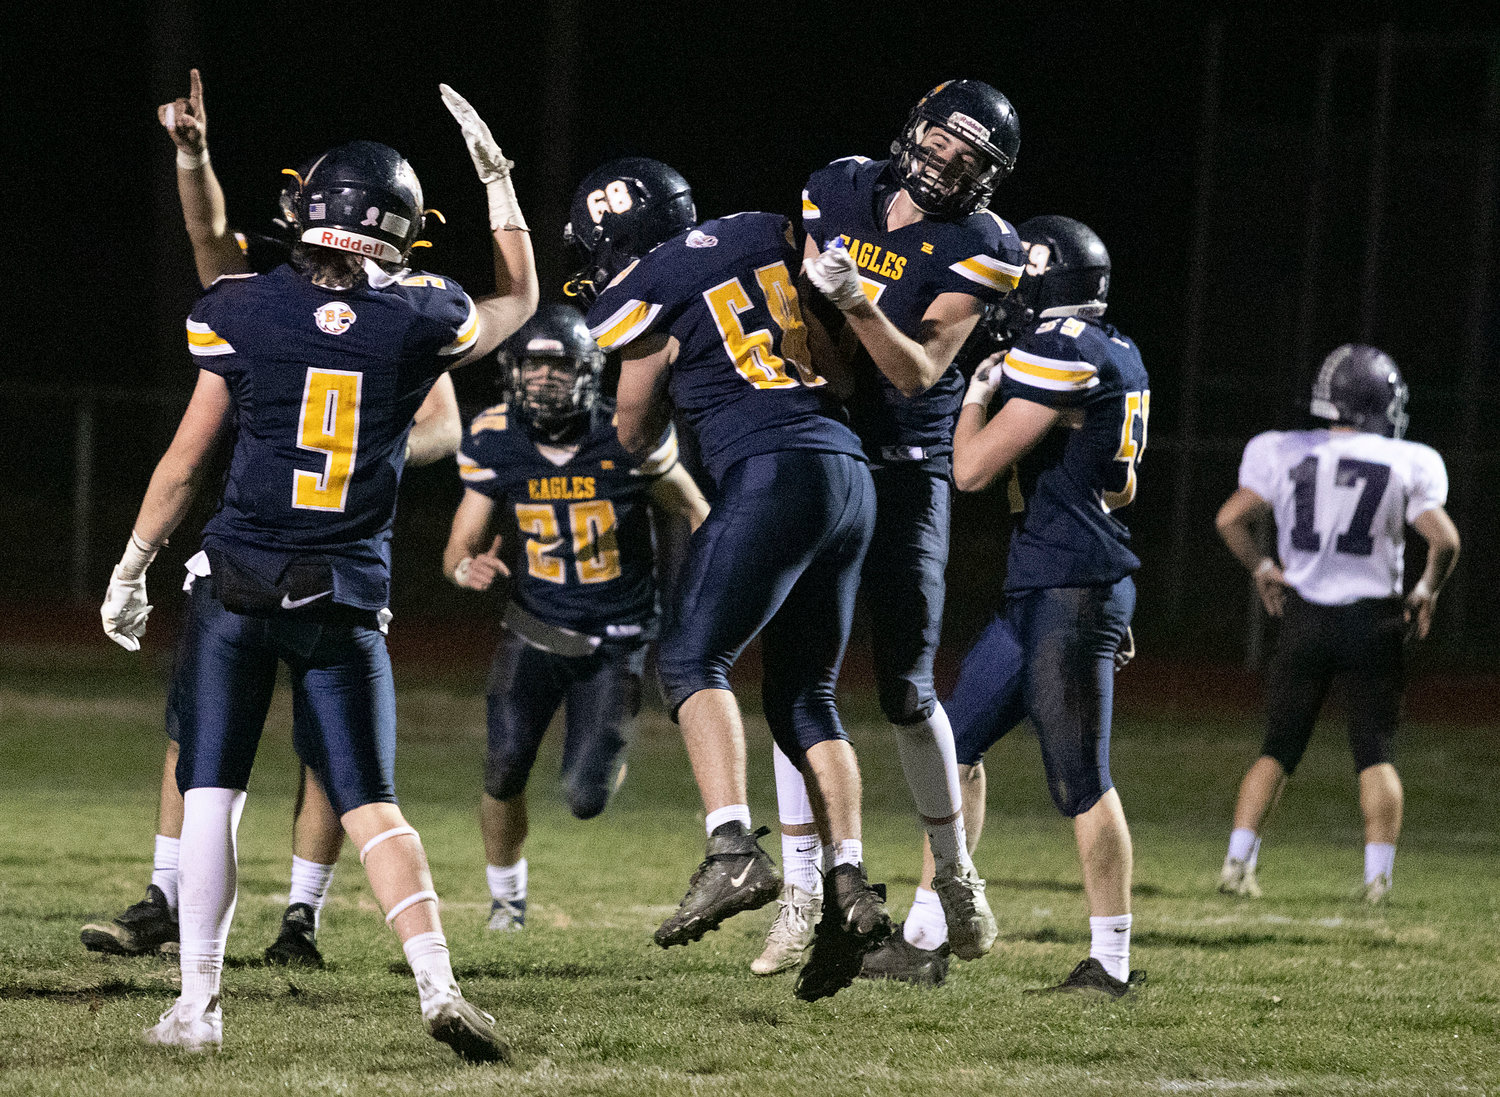 The Eagles celebrate after Bryan Ivatts scores on a long touchdown run in the first half.